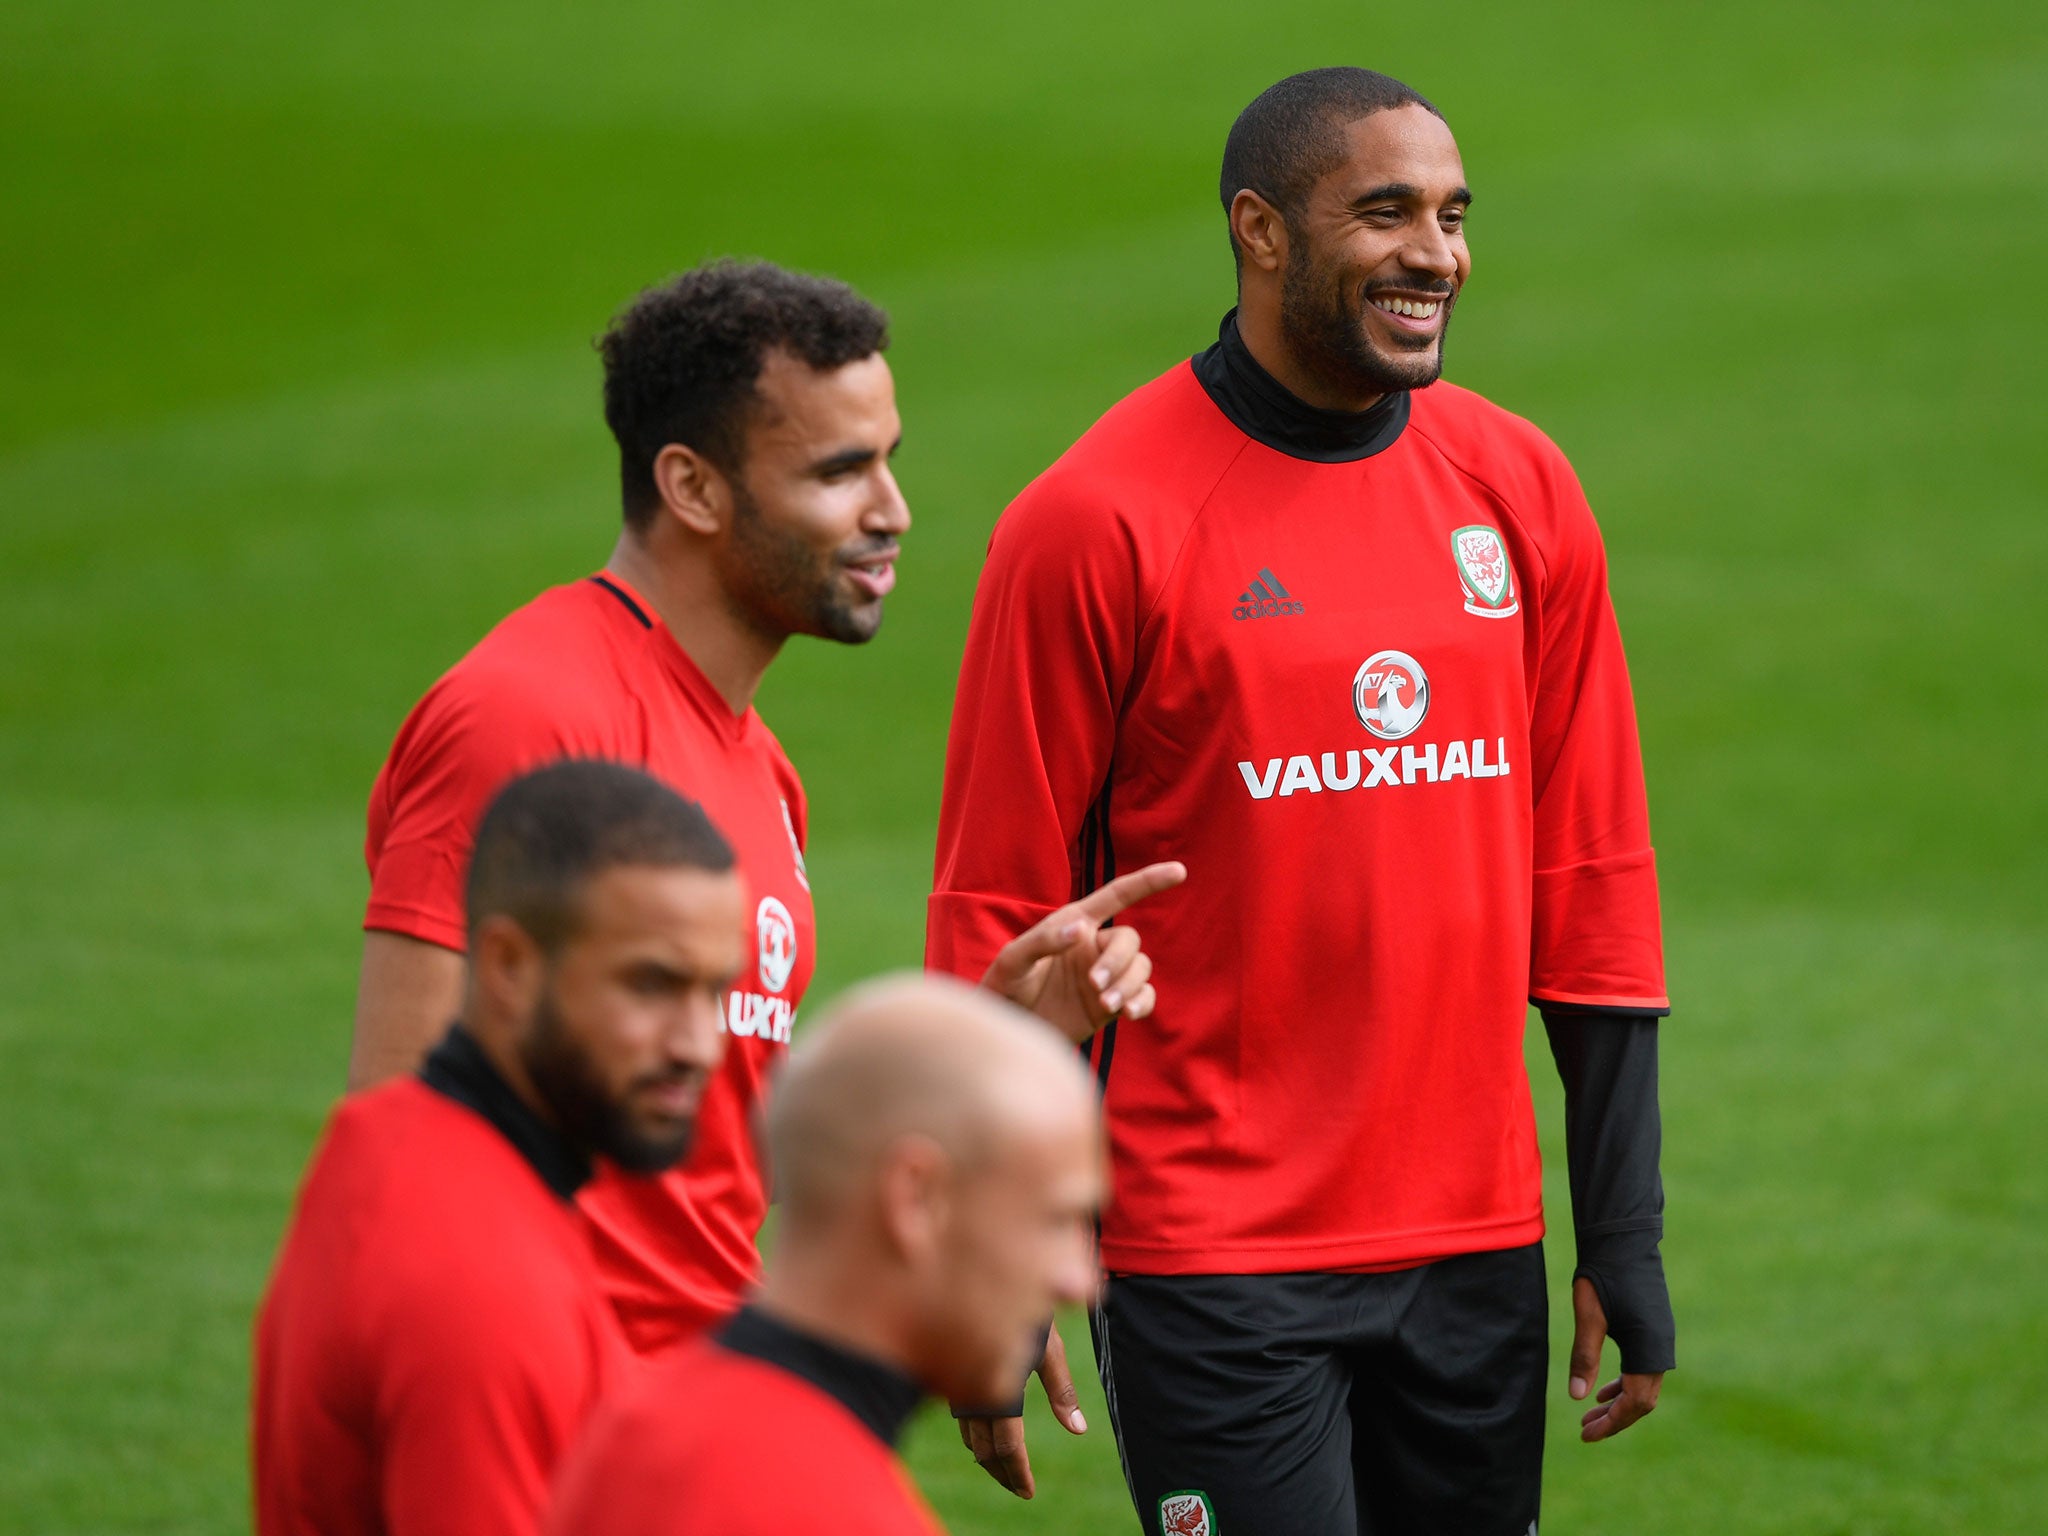 Ashley Williams will be looking to build upon the success of Euro 2016 as Wales get ready for the World Cup qualifiers